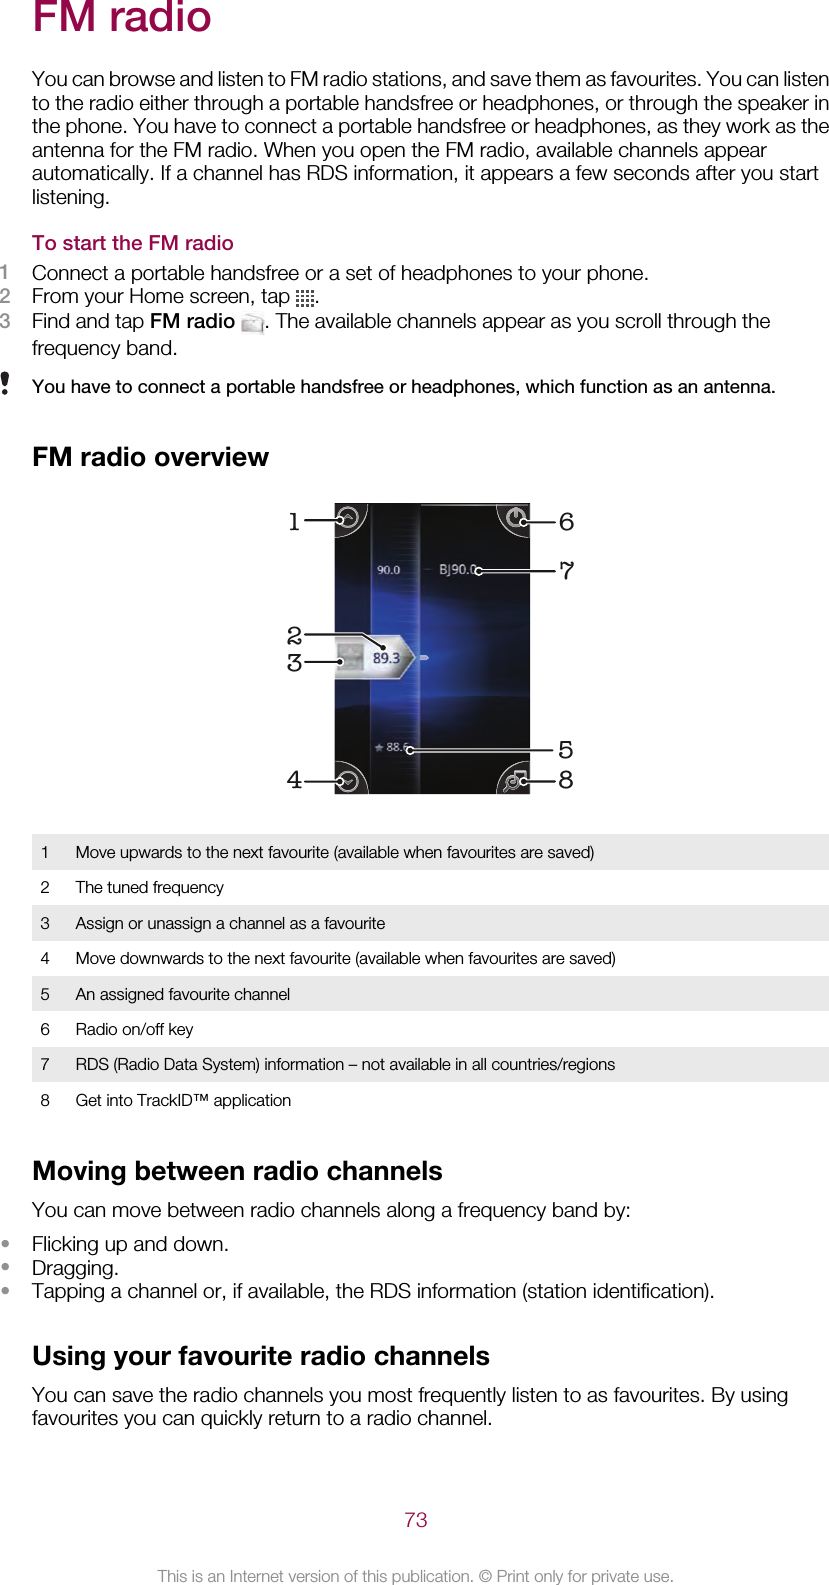 FM radioYou can browse and listen to FM radio stations, and save them as favourites. You can listento the radio either through a portable handsfree or headphones, or through the speaker inthe phone. You have to connect a portable handsfree or headphones, as they work as theantenna for the FM radio. When you open the FM radio, available channels appearautomatically. If a channel has RDS information, it appears a few seconds after you startlistening.To start the FM radio1Connect a portable handsfree or a set of headphones to your phone.2From your Home screen, tap  .3Find and tap FM radio . The available channels appear as you scroll through thefrequency band.You have to connect a portable handsfree or headphones, which function as an antenna.FM radio overview532147681Move upwards to the next favourite (available when favourites are saved)2 The tuned frequency3 Assign or unassign a channel as a favourite4 Move downwards to the next favourite (available when favourites are saved)5 An assigned favourite channel6 Radio on/off key7 RDS (Radio Data System) information – not available in all countries/regions8 Get into TrackID™ applicationMoving between radio channelsYou can move between radio channels along a frequency band by:•Flicking up and down.•Dragging.•Tapping a channel or, if available, the RDS information (station identification).Using your favourite radio channelsYou can save the radio channels you most frequently listen to as favourites. By usingfavourites you can quickly return to a radio channel.73This is an Internet version of this publication. © Print only for private use.